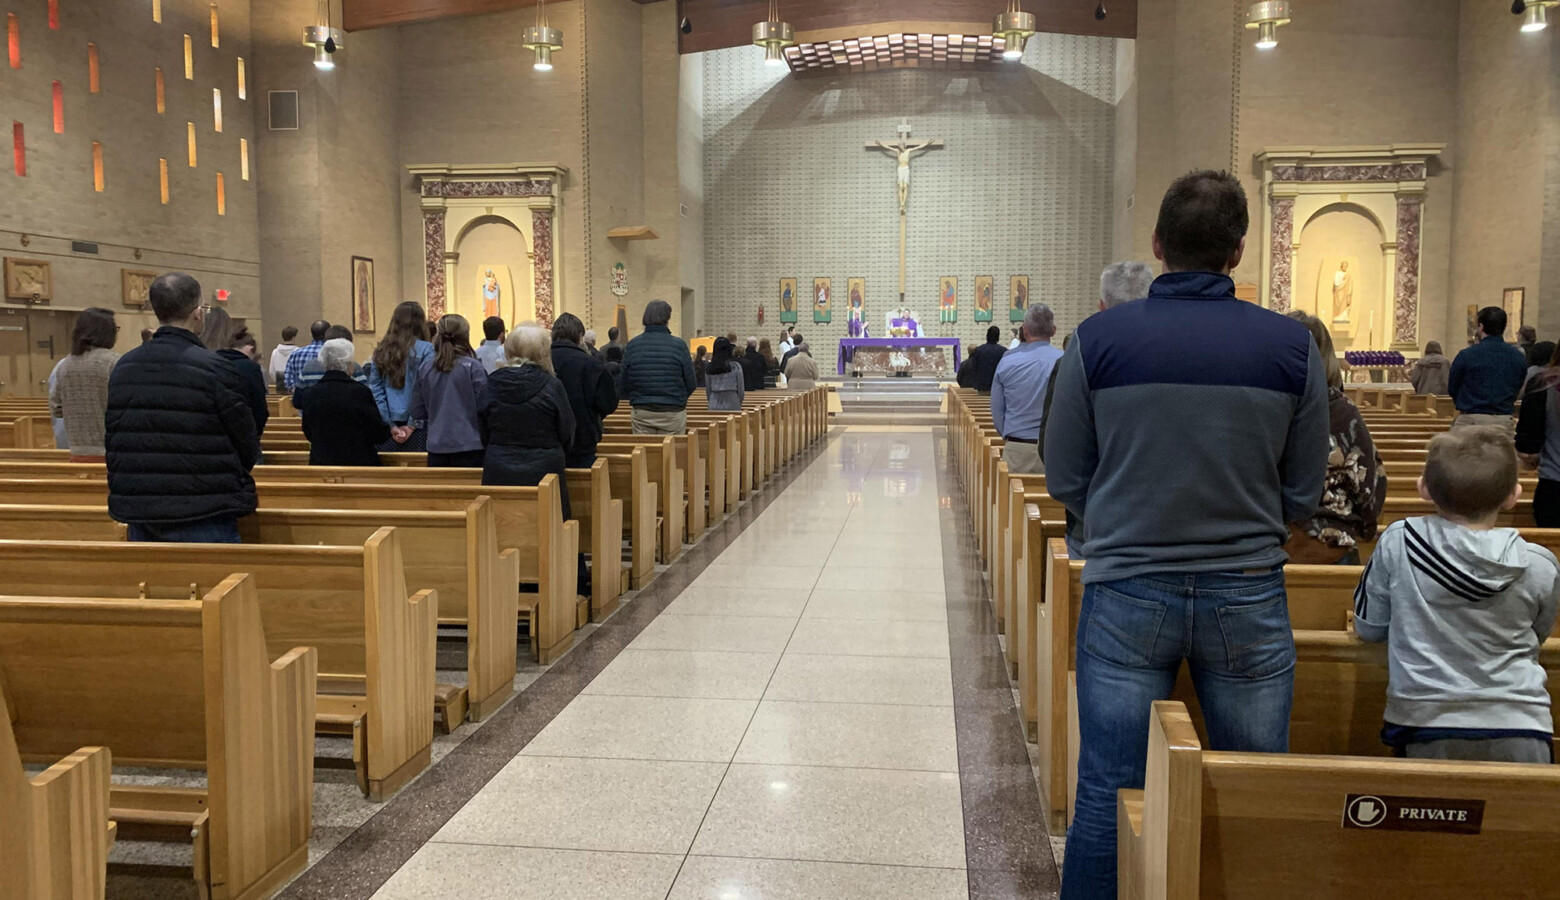 Sunday morning mass at St. Matthew Cathedral in South Bend on March 15, 2020. (Annacaroline Caruso/WVPE)